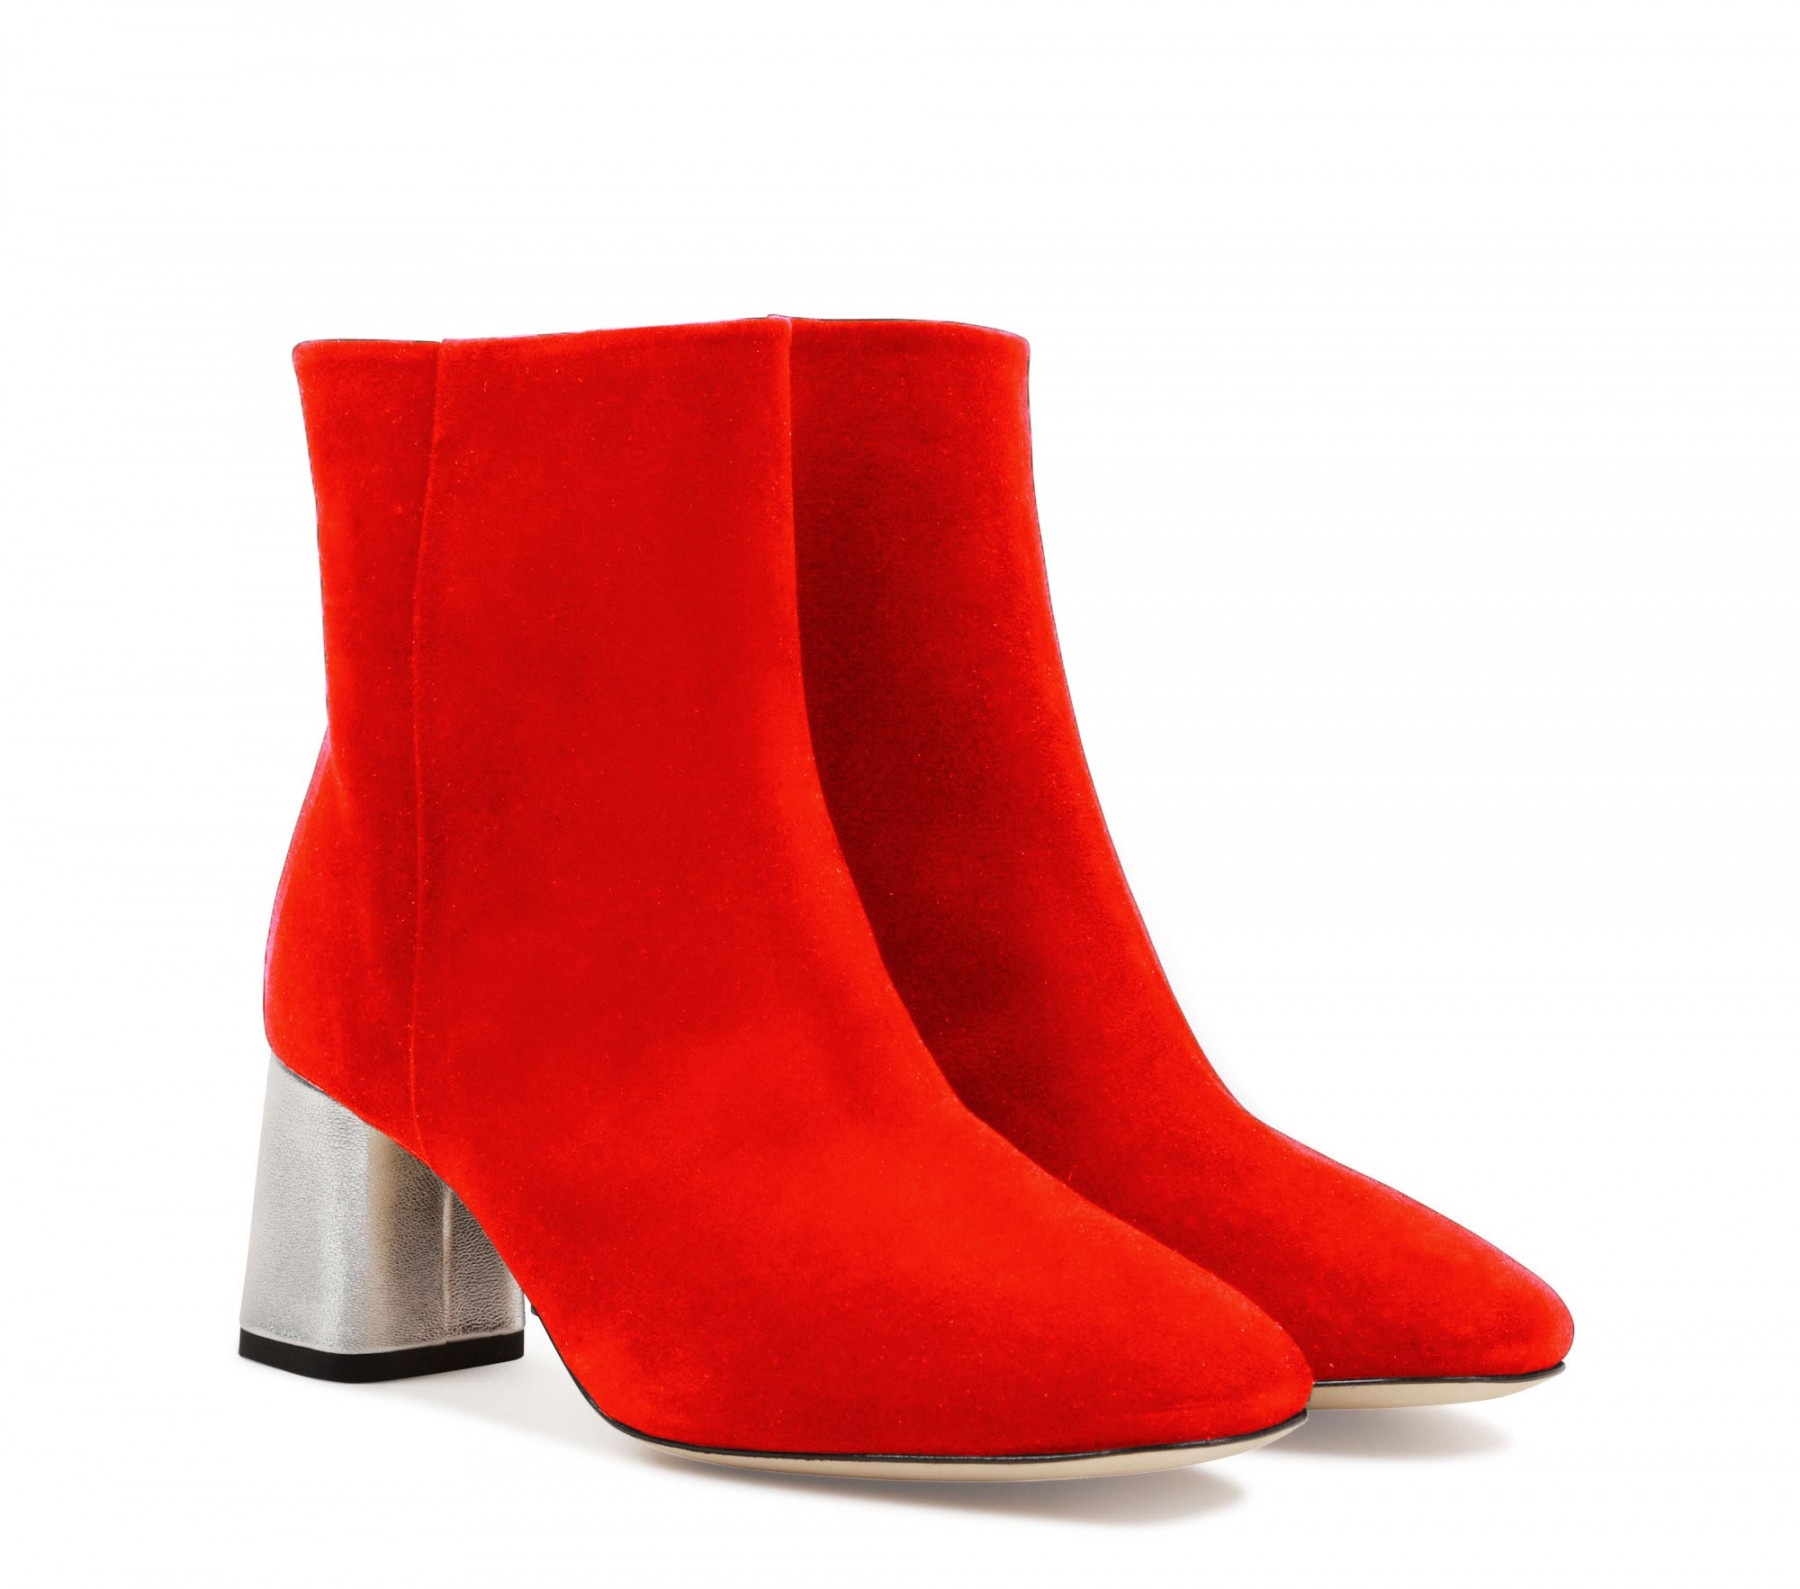 Melo ankle boots - 2